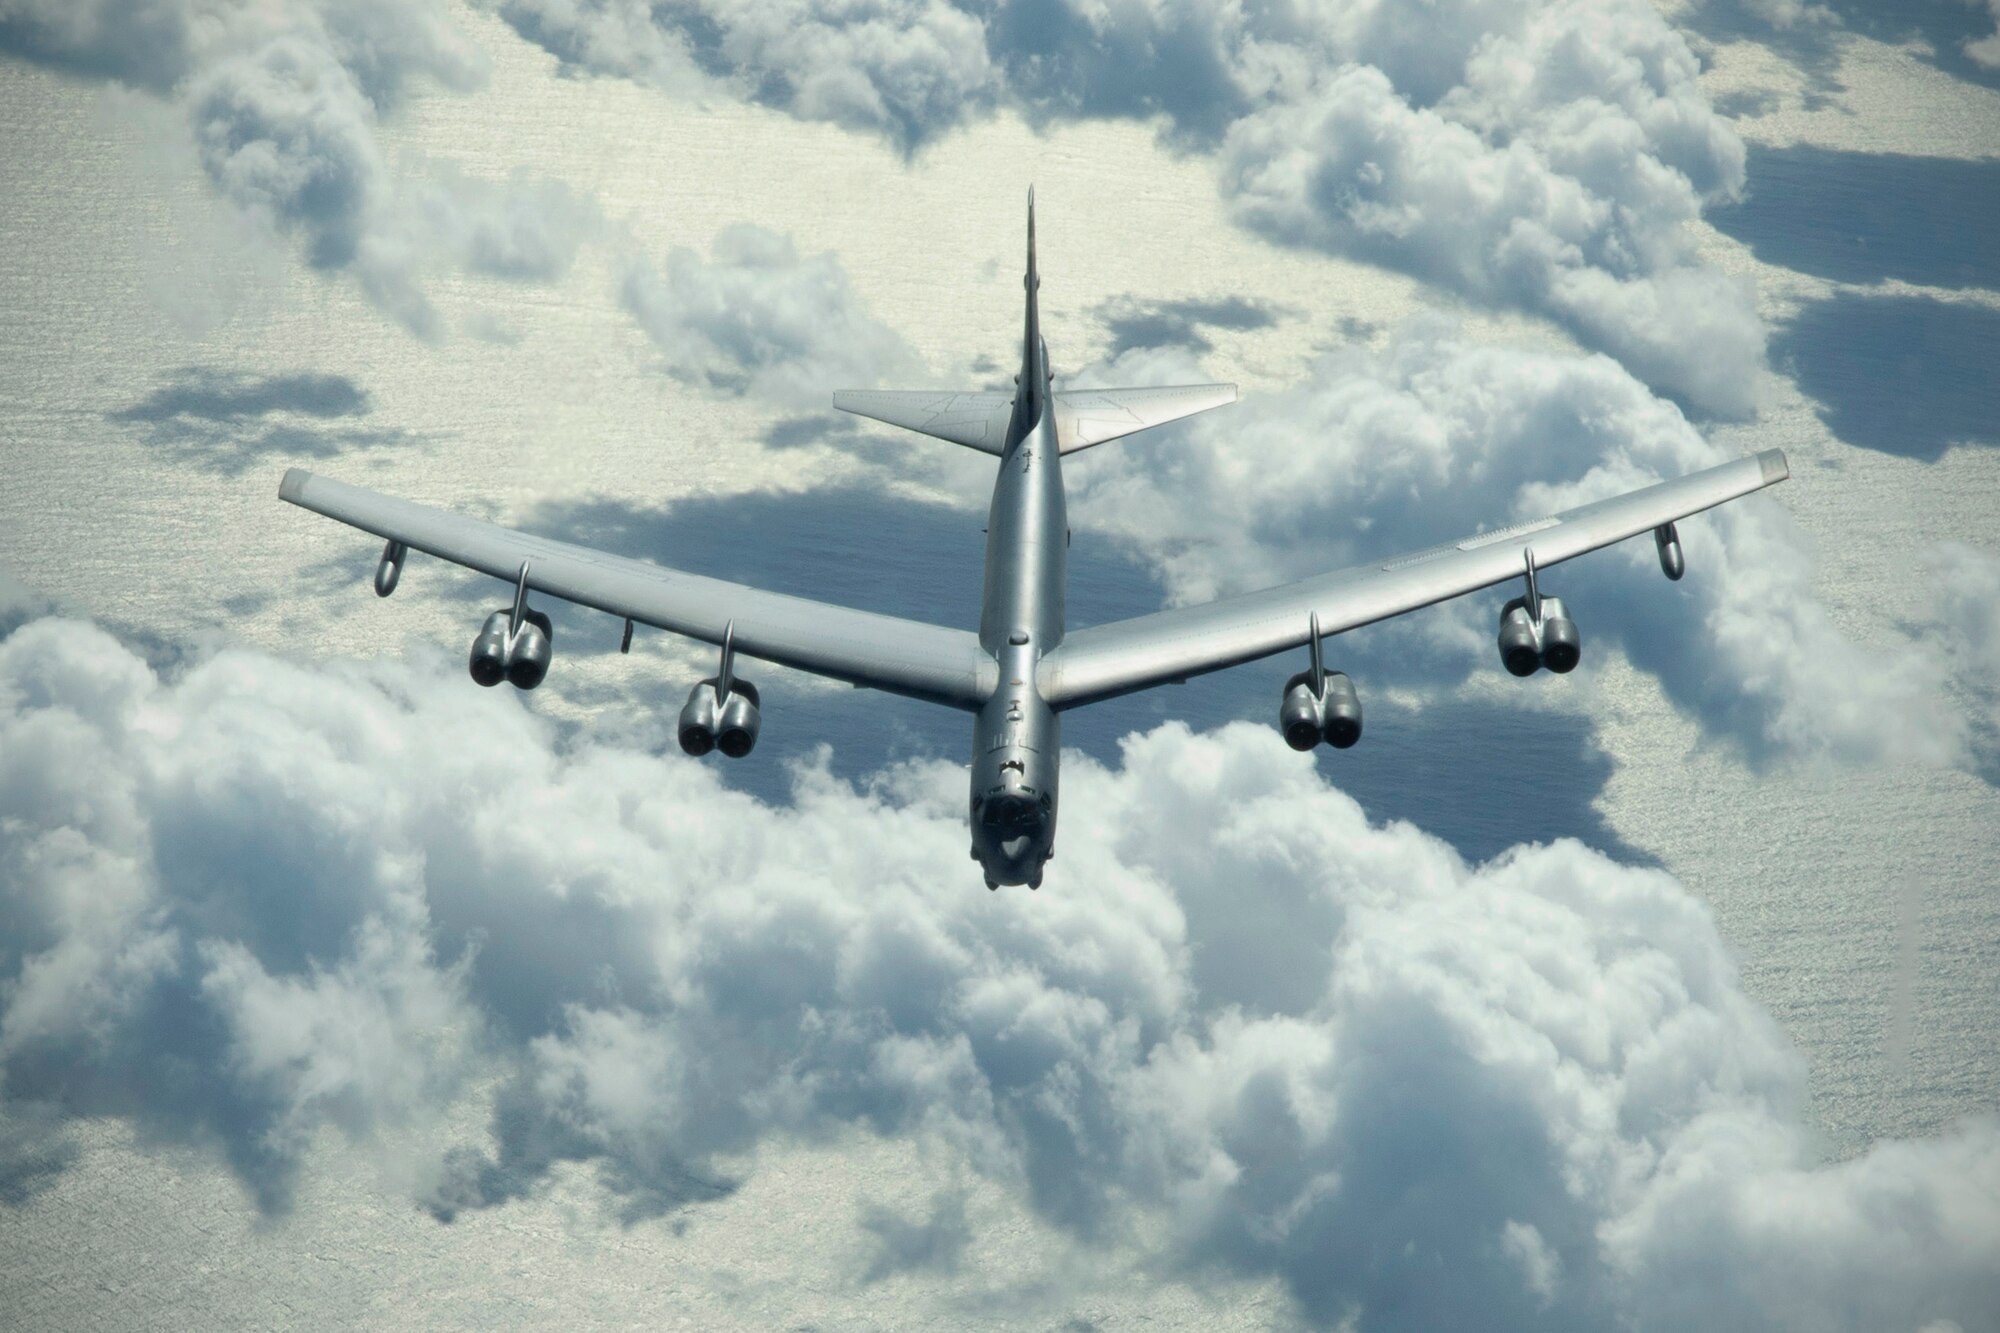 A U.S. Air Force B-52 Stratofortress flies over the Pacific Ocean July 14, near the coast of Brisbane, Australia, after being refueled by a USAF KC-10 Extender in support of Exercise Talisman Sabre 19. The Stratofortress and Extender were some of several aircraft used during TS19, alongside other USAF and RAAF airborne warning and control system aircraft, refuelers, tankers and bombers.(U.S. Air Force photo by Senior Airman Elora J. Martinez)